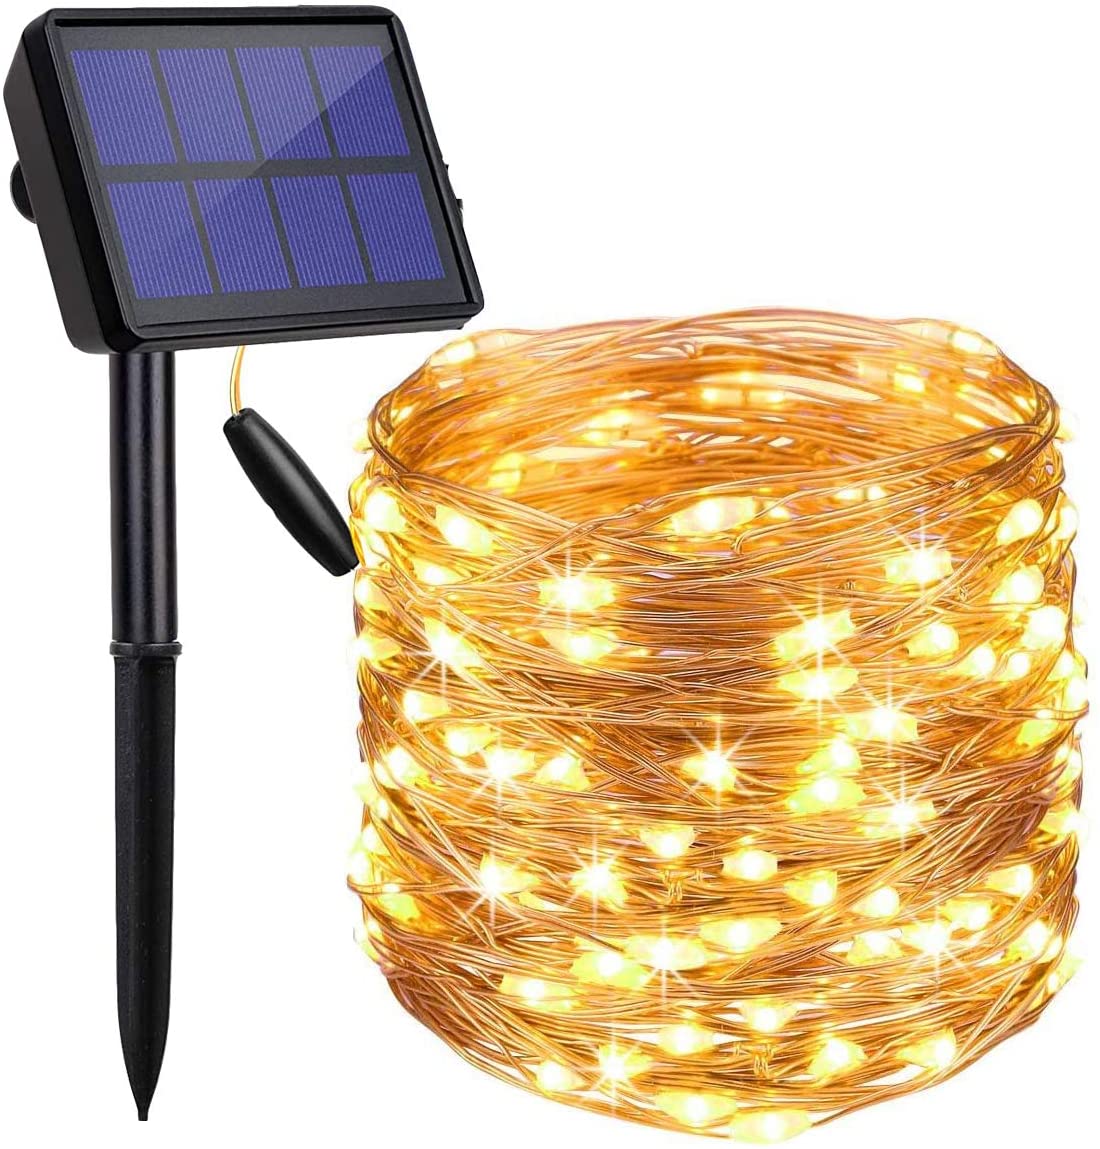 200 Waterproof LED Solar Fairy Light Outdoor with 8 Lighting Modes for Home,Garden and Decoration - SILBERSHELL